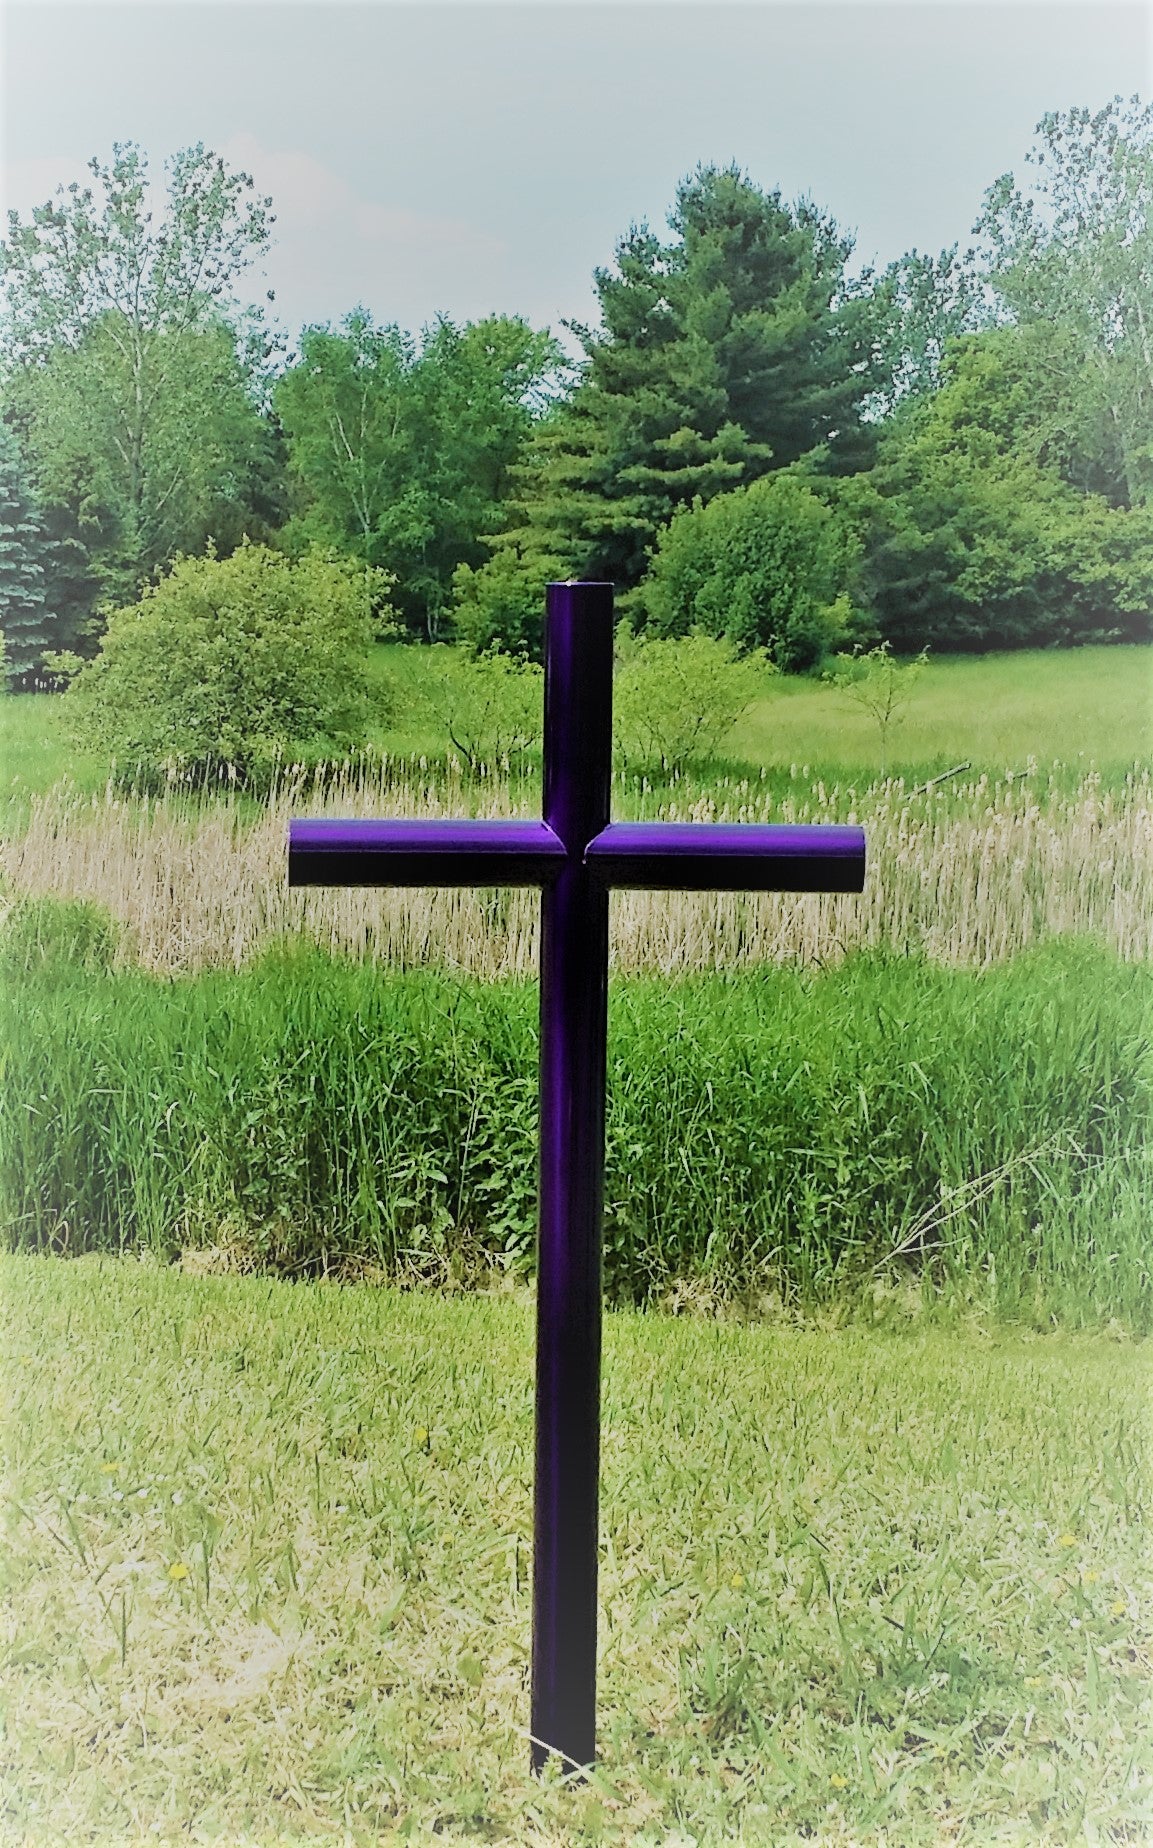 Our Purple Everlasting Cross Represents The Loss Of Our Loved One To Pancreatic Cancer, Esophageal Cancer.  Uniquely Memorialize With Engraving and Final Resting Place At Gravesite, Roadside, Pets Favorite Spot in Yard